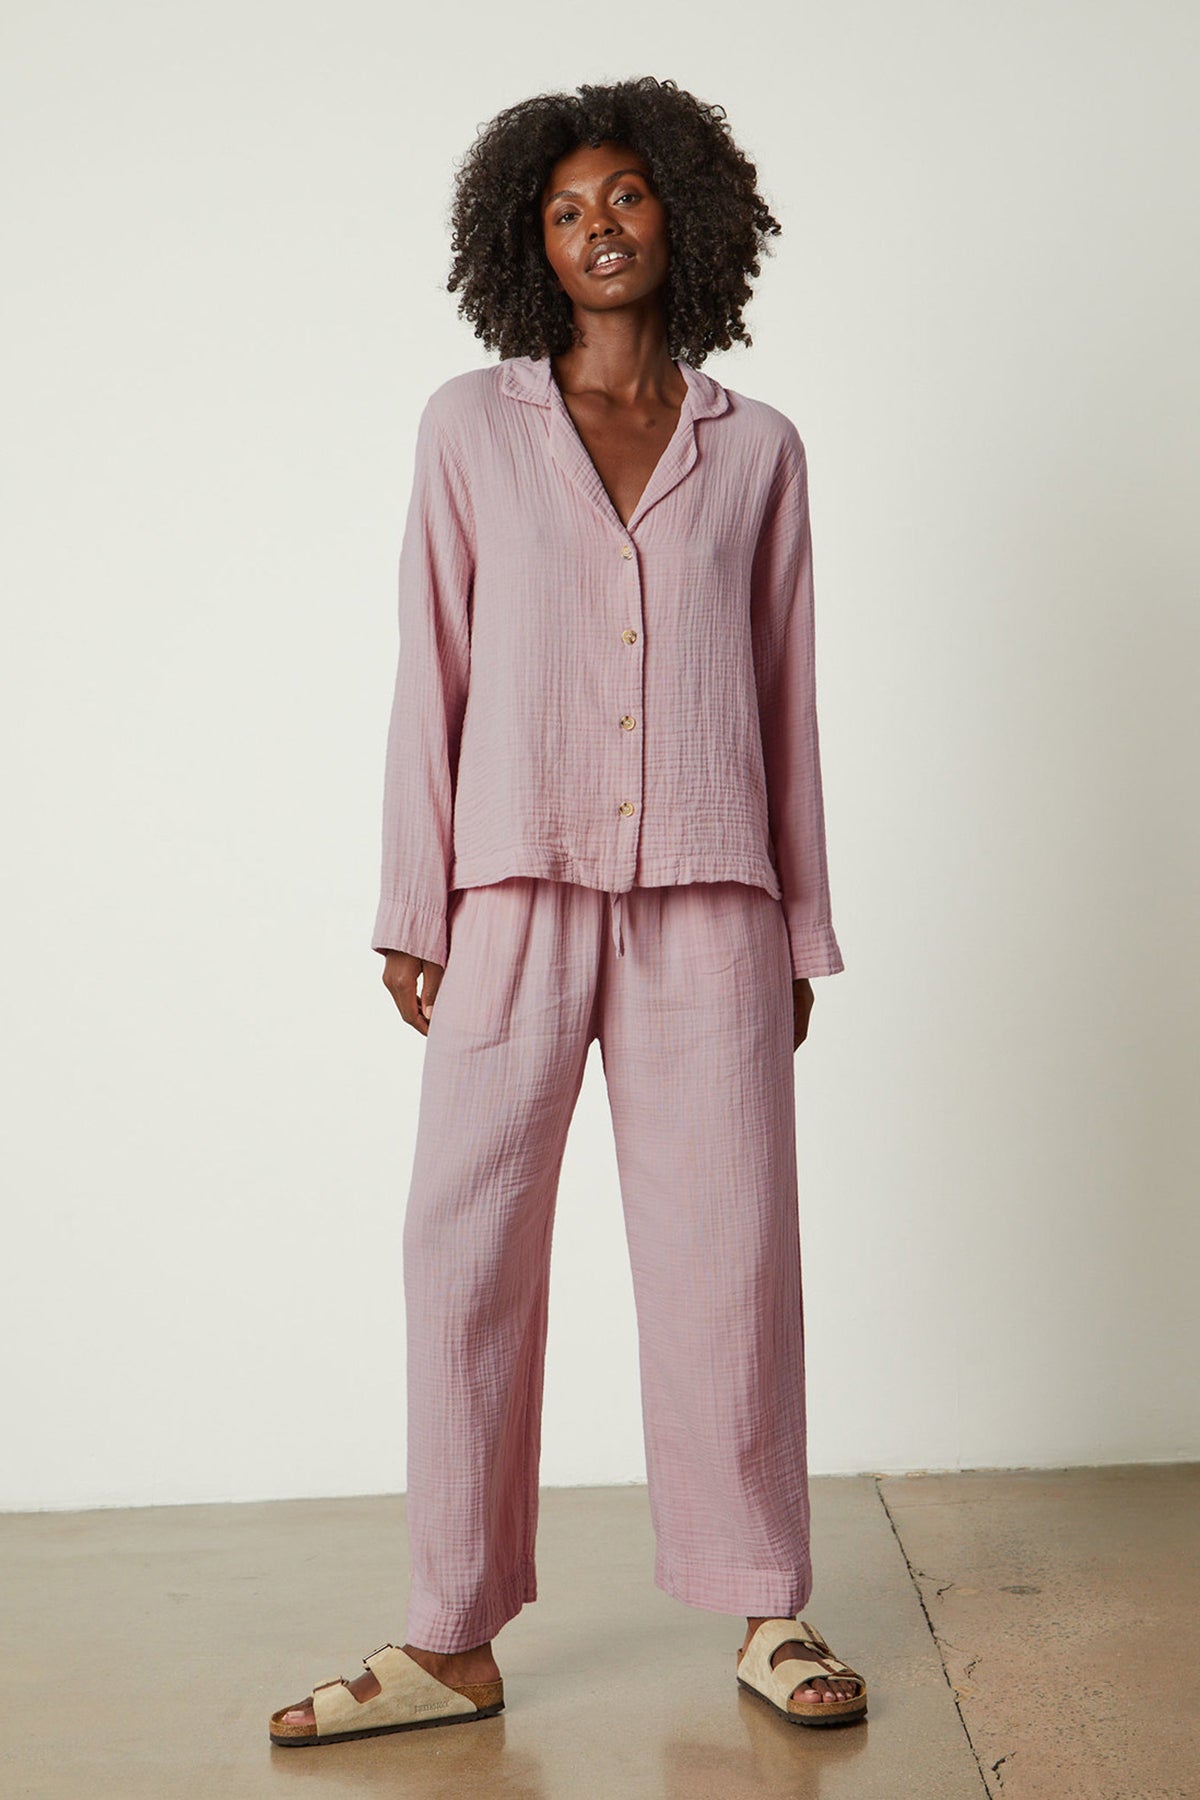   The model is wearing a pink Jenny Graham Home PAJAMA PANT set. 